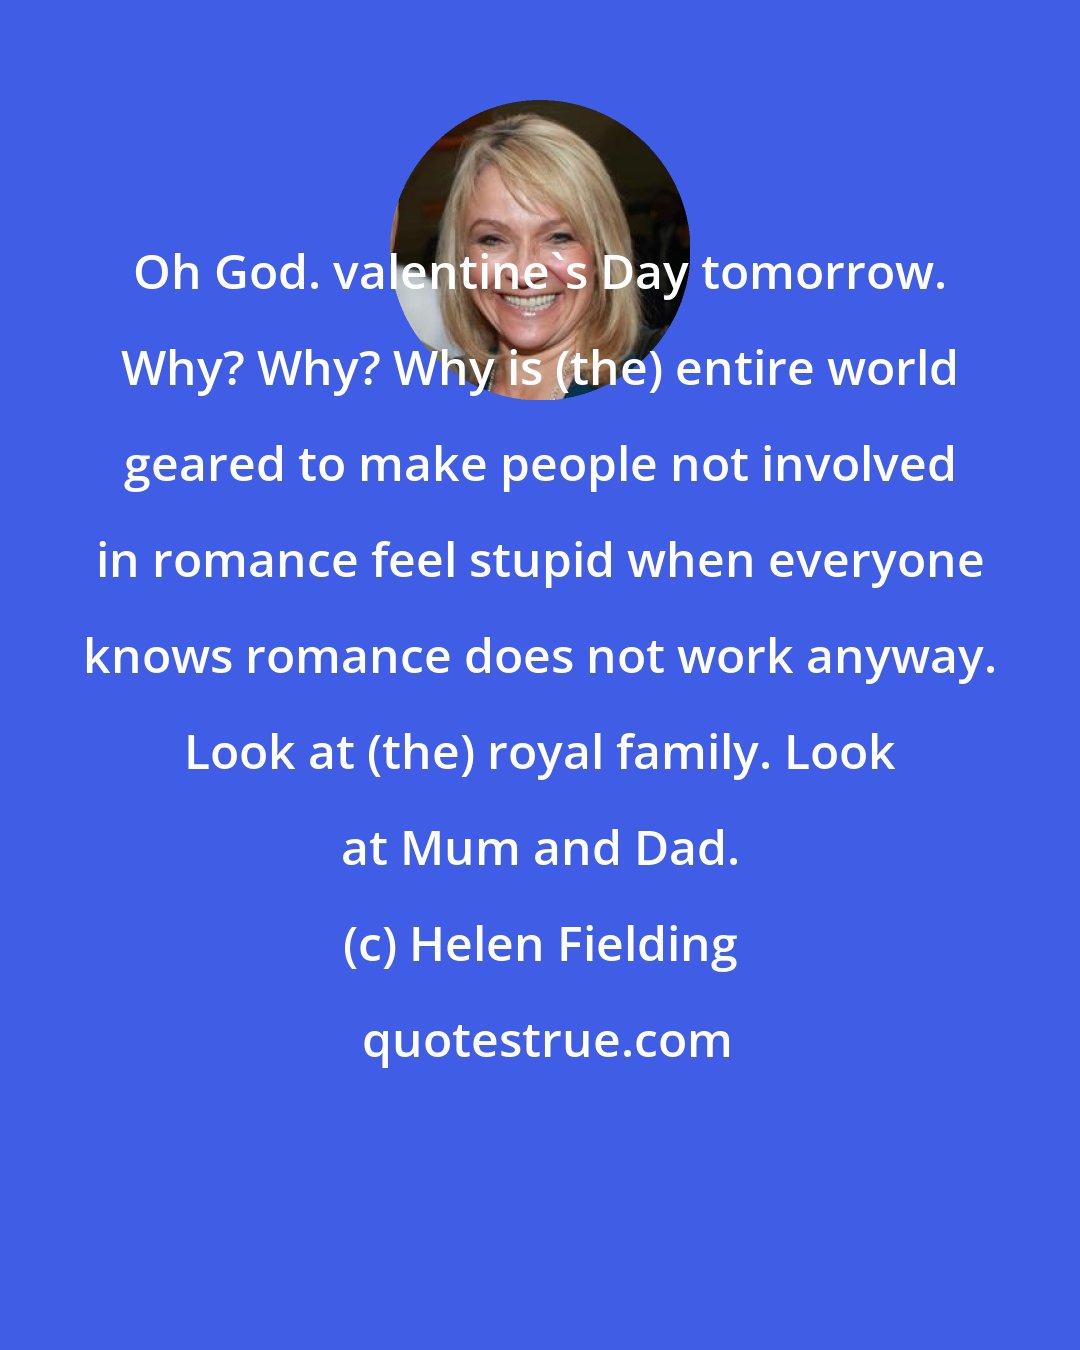 Helen Fielding: Oh God. valentine's Day tomorrow. Why? Why? Why is (the) entire world geared to make people not involved in romance feel stupid when everyone knows romance does not work anyway. Look at (the) royal family. Look at Mum and Dad.